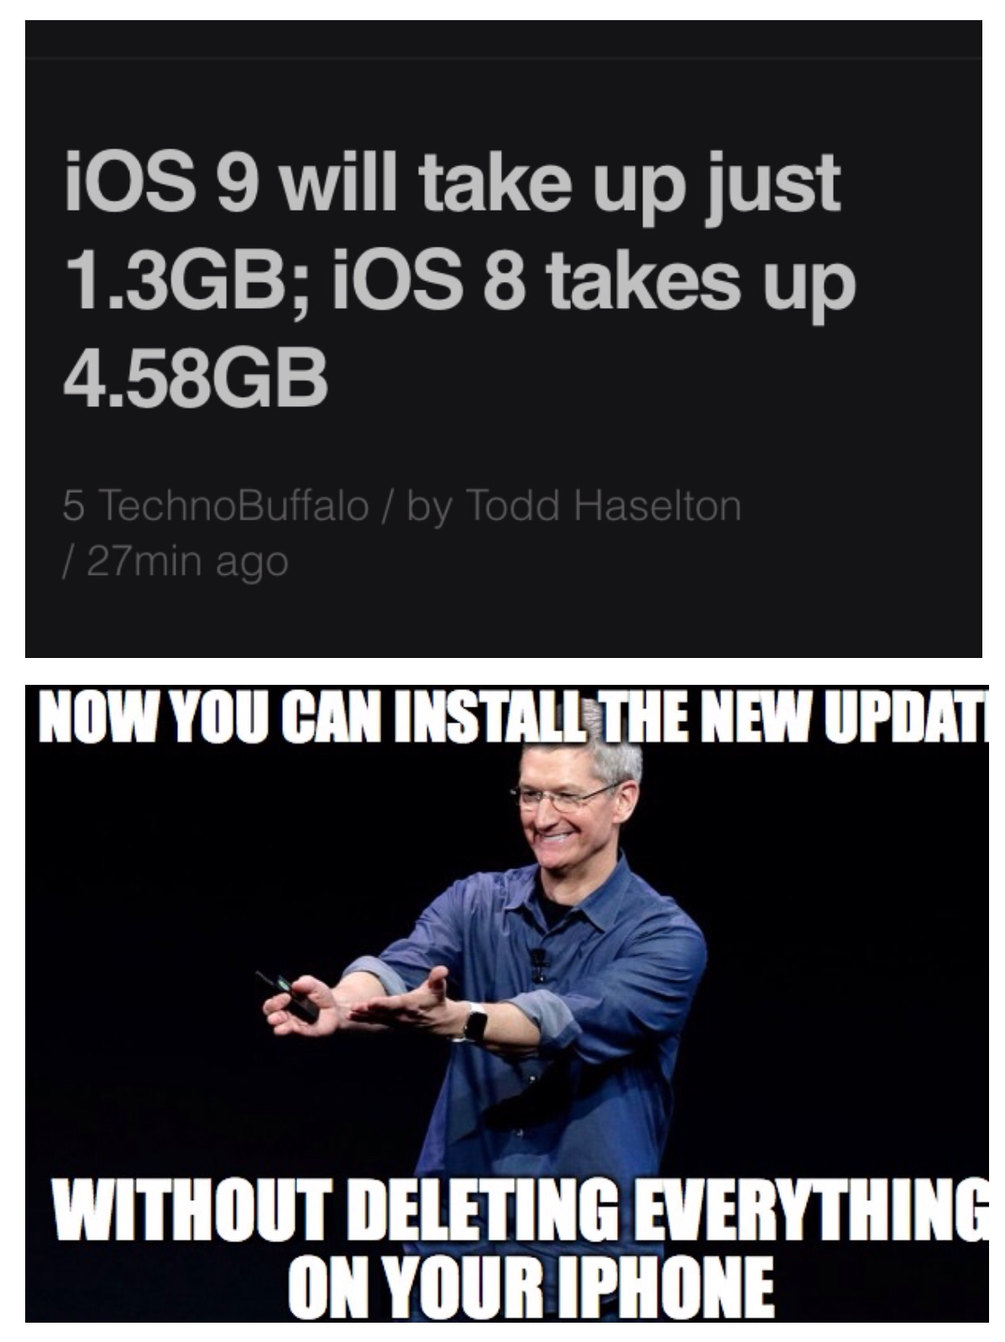 Tim Cook be putting on the bad poker face - meme